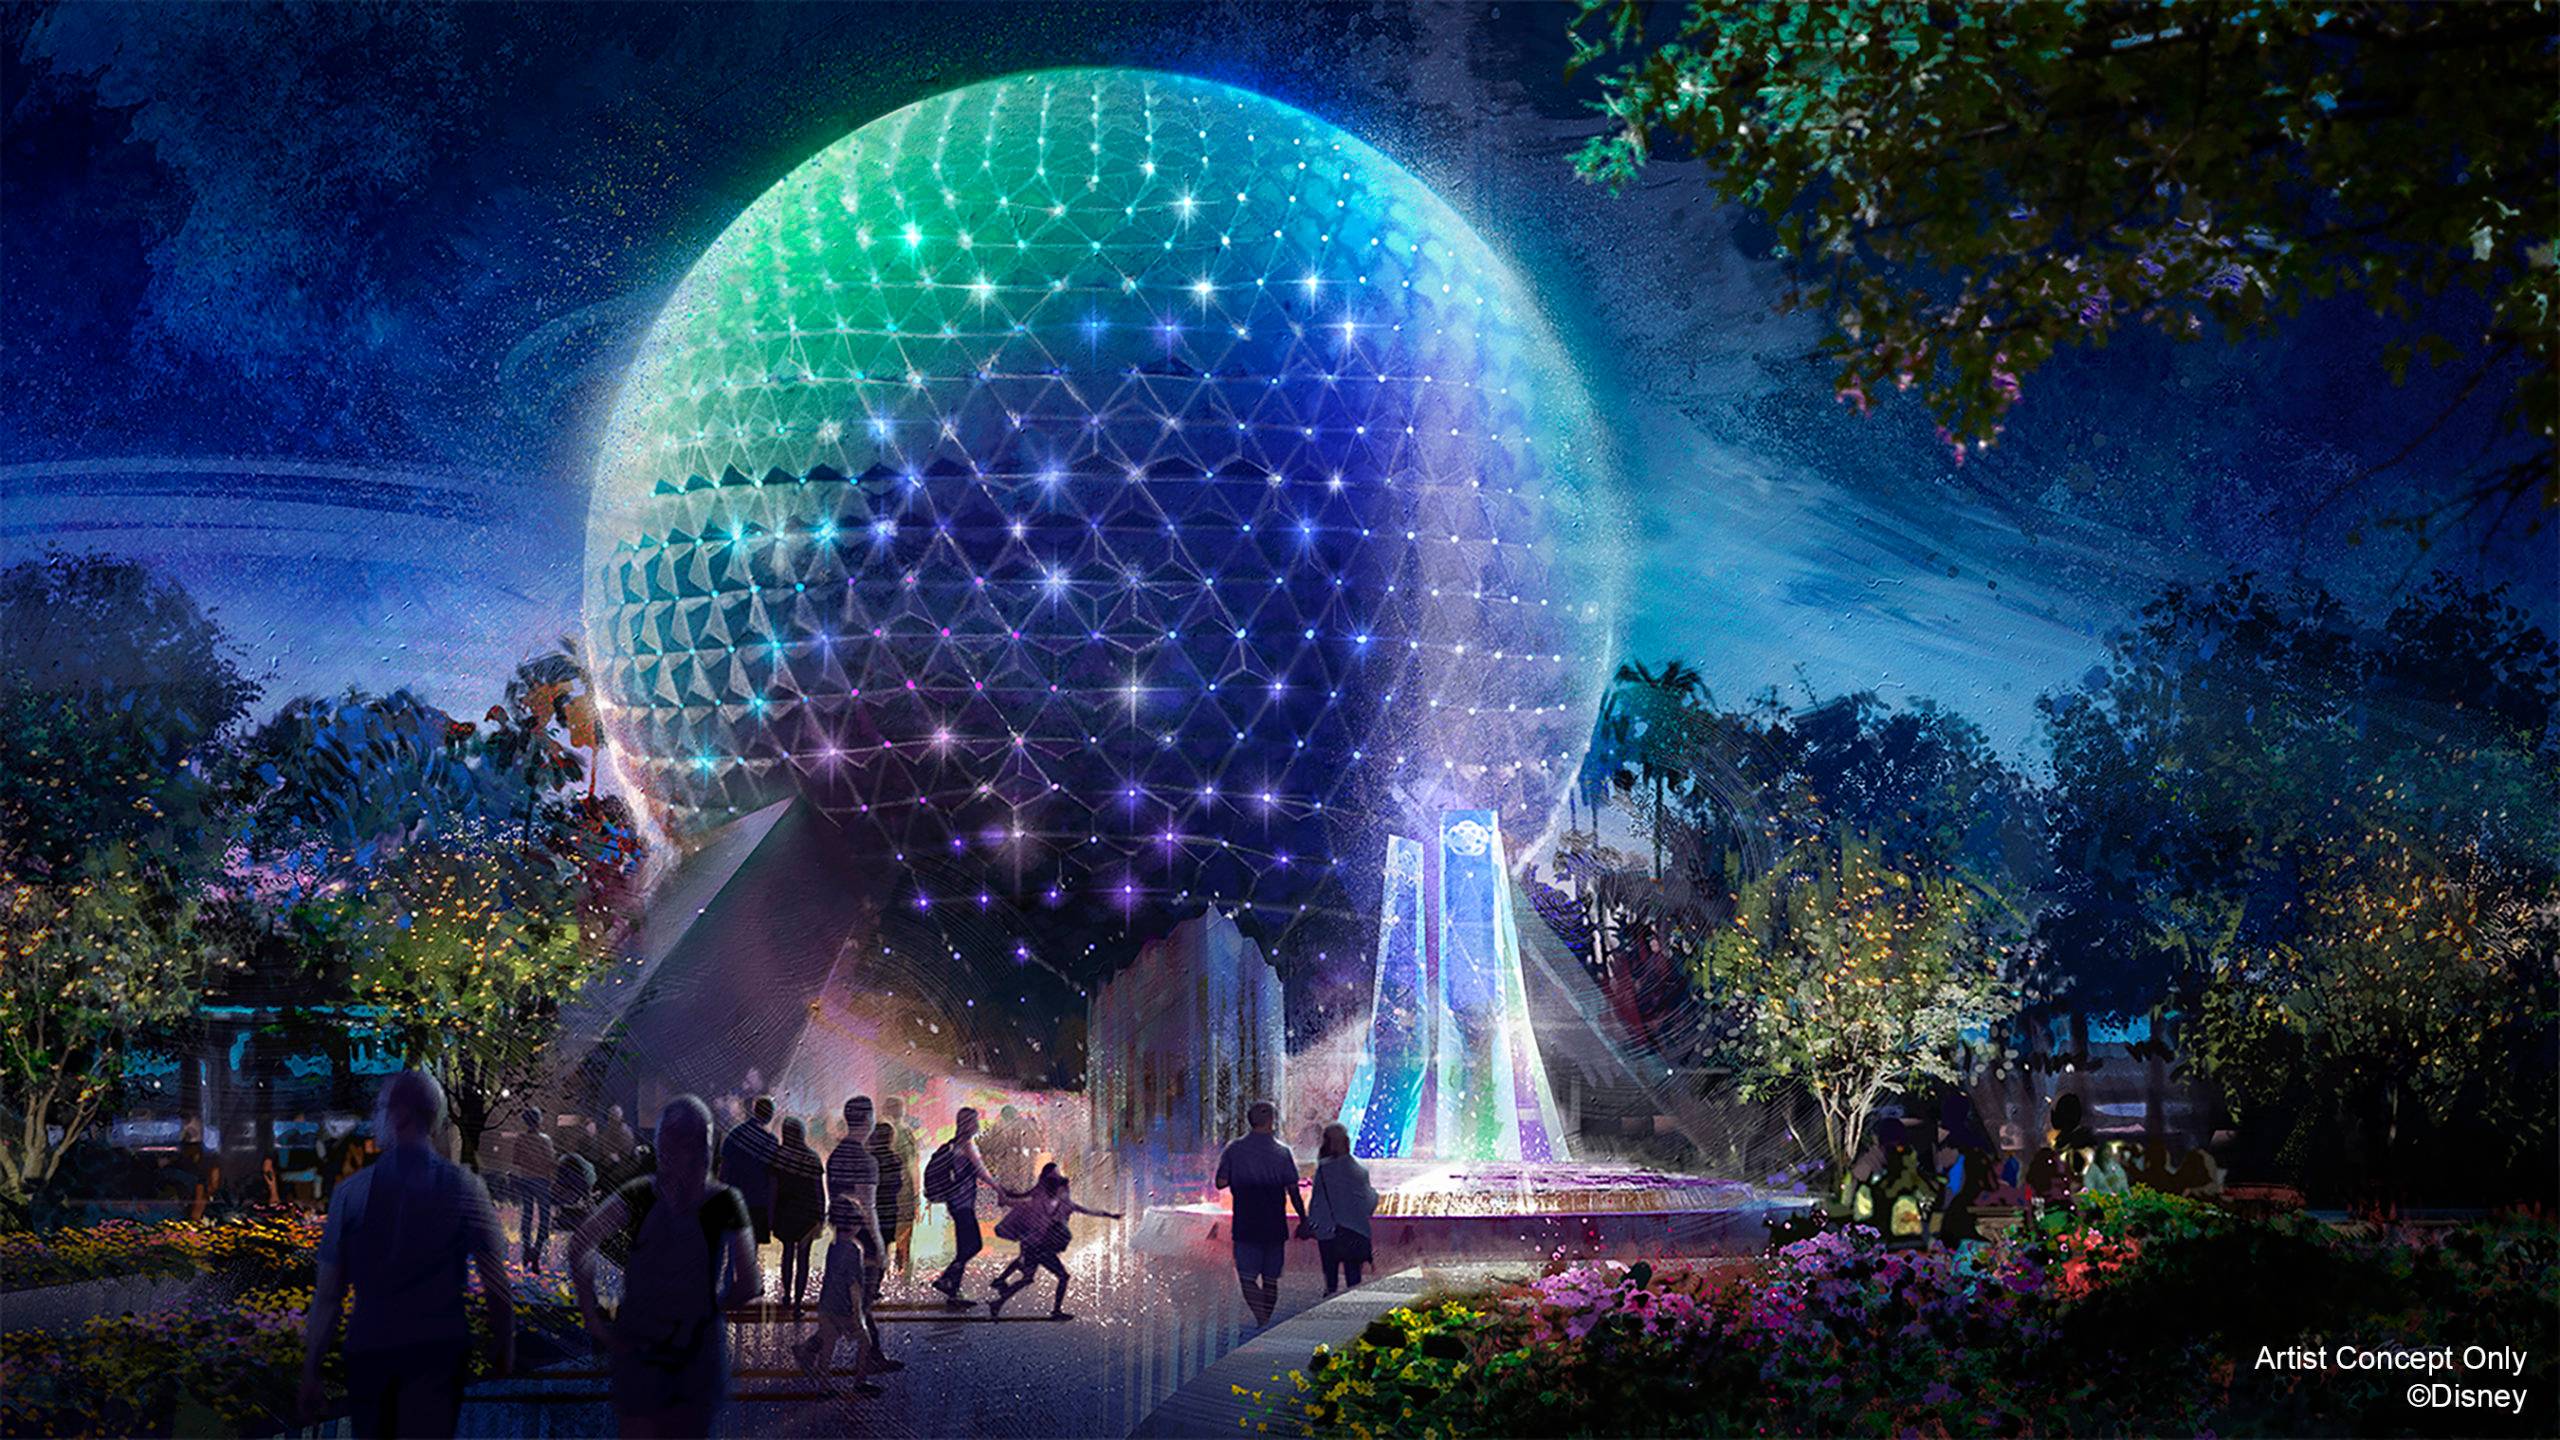 Spaceship Earth will come to life at night with their own EARidescent glow